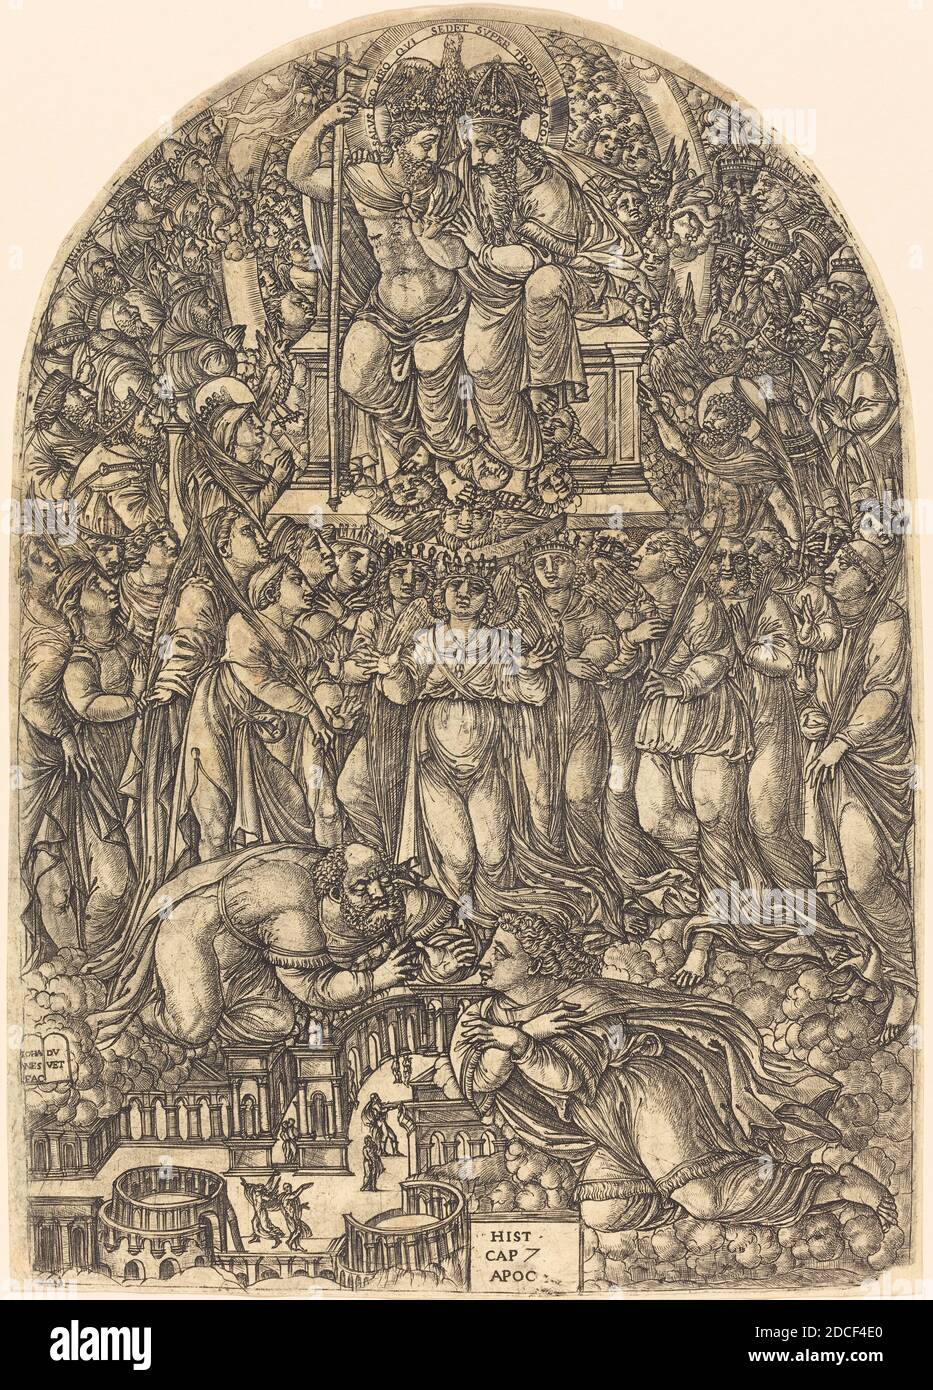 Jean Duvet, (artist), French, 1485 - c. 1570, The Multitude Which Stands before the Throne, L'Apocalypse figurée, (series), 1546/1556, engraving Stock Photo